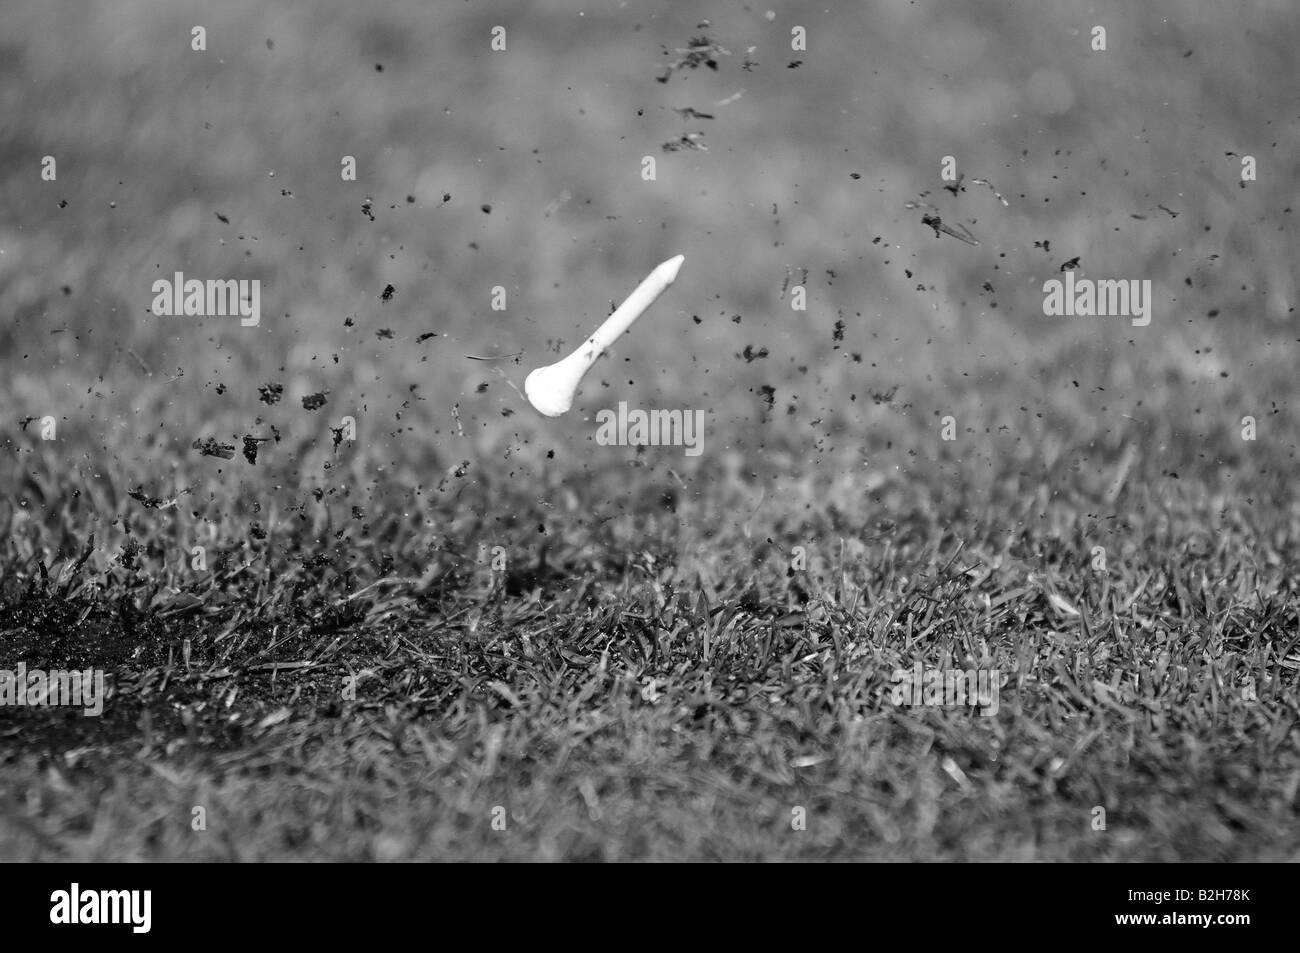 A golf tee in flight after a perfect drive. The grass and mud fly through the air, the tee, and moment, frozen forever in tîme Stock Photo